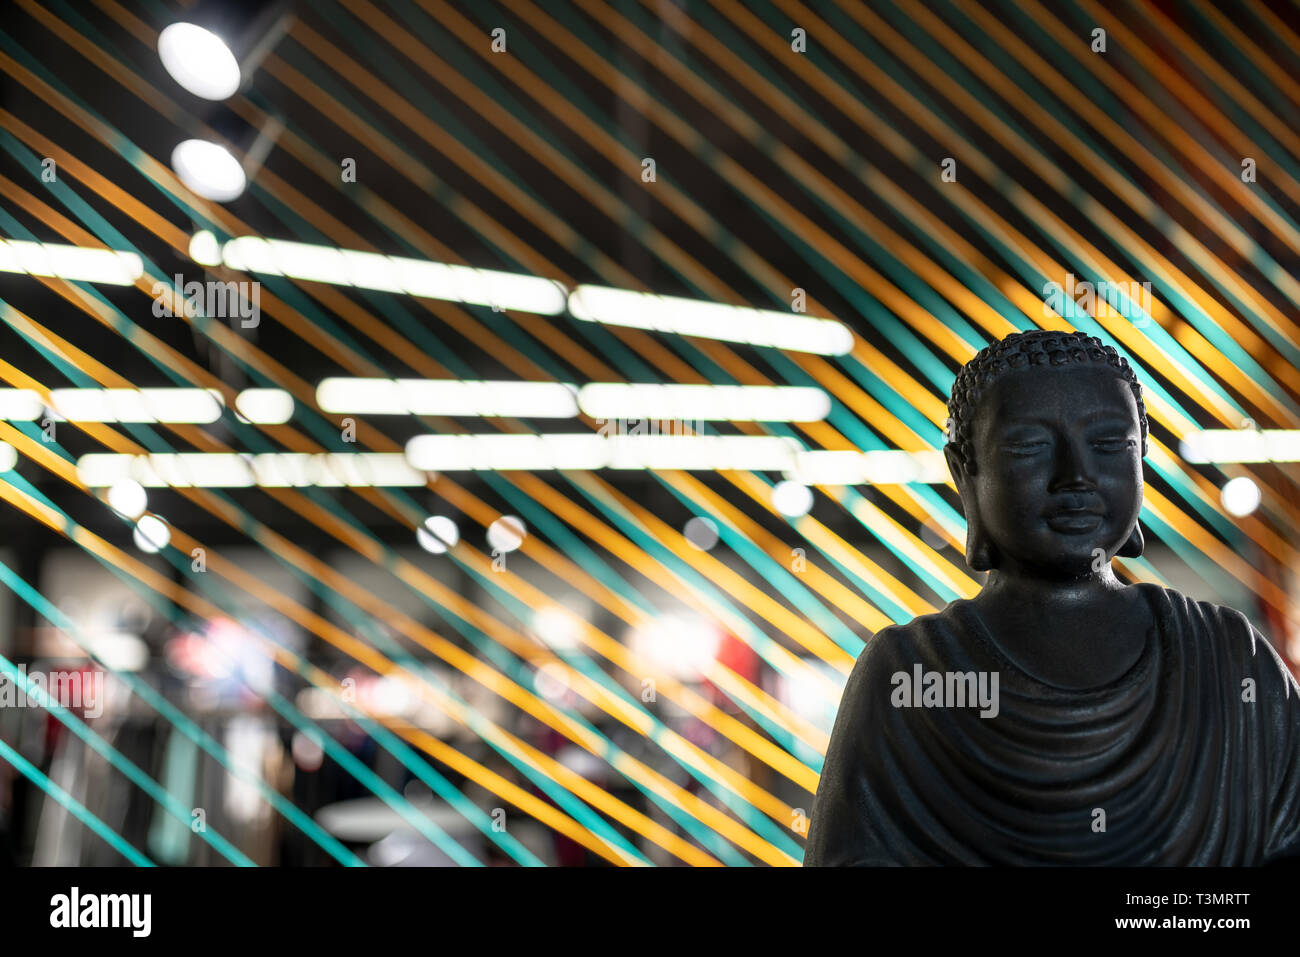 Bust of Buddha in illuminated interior with colorful ropes lines installation Stock Photo